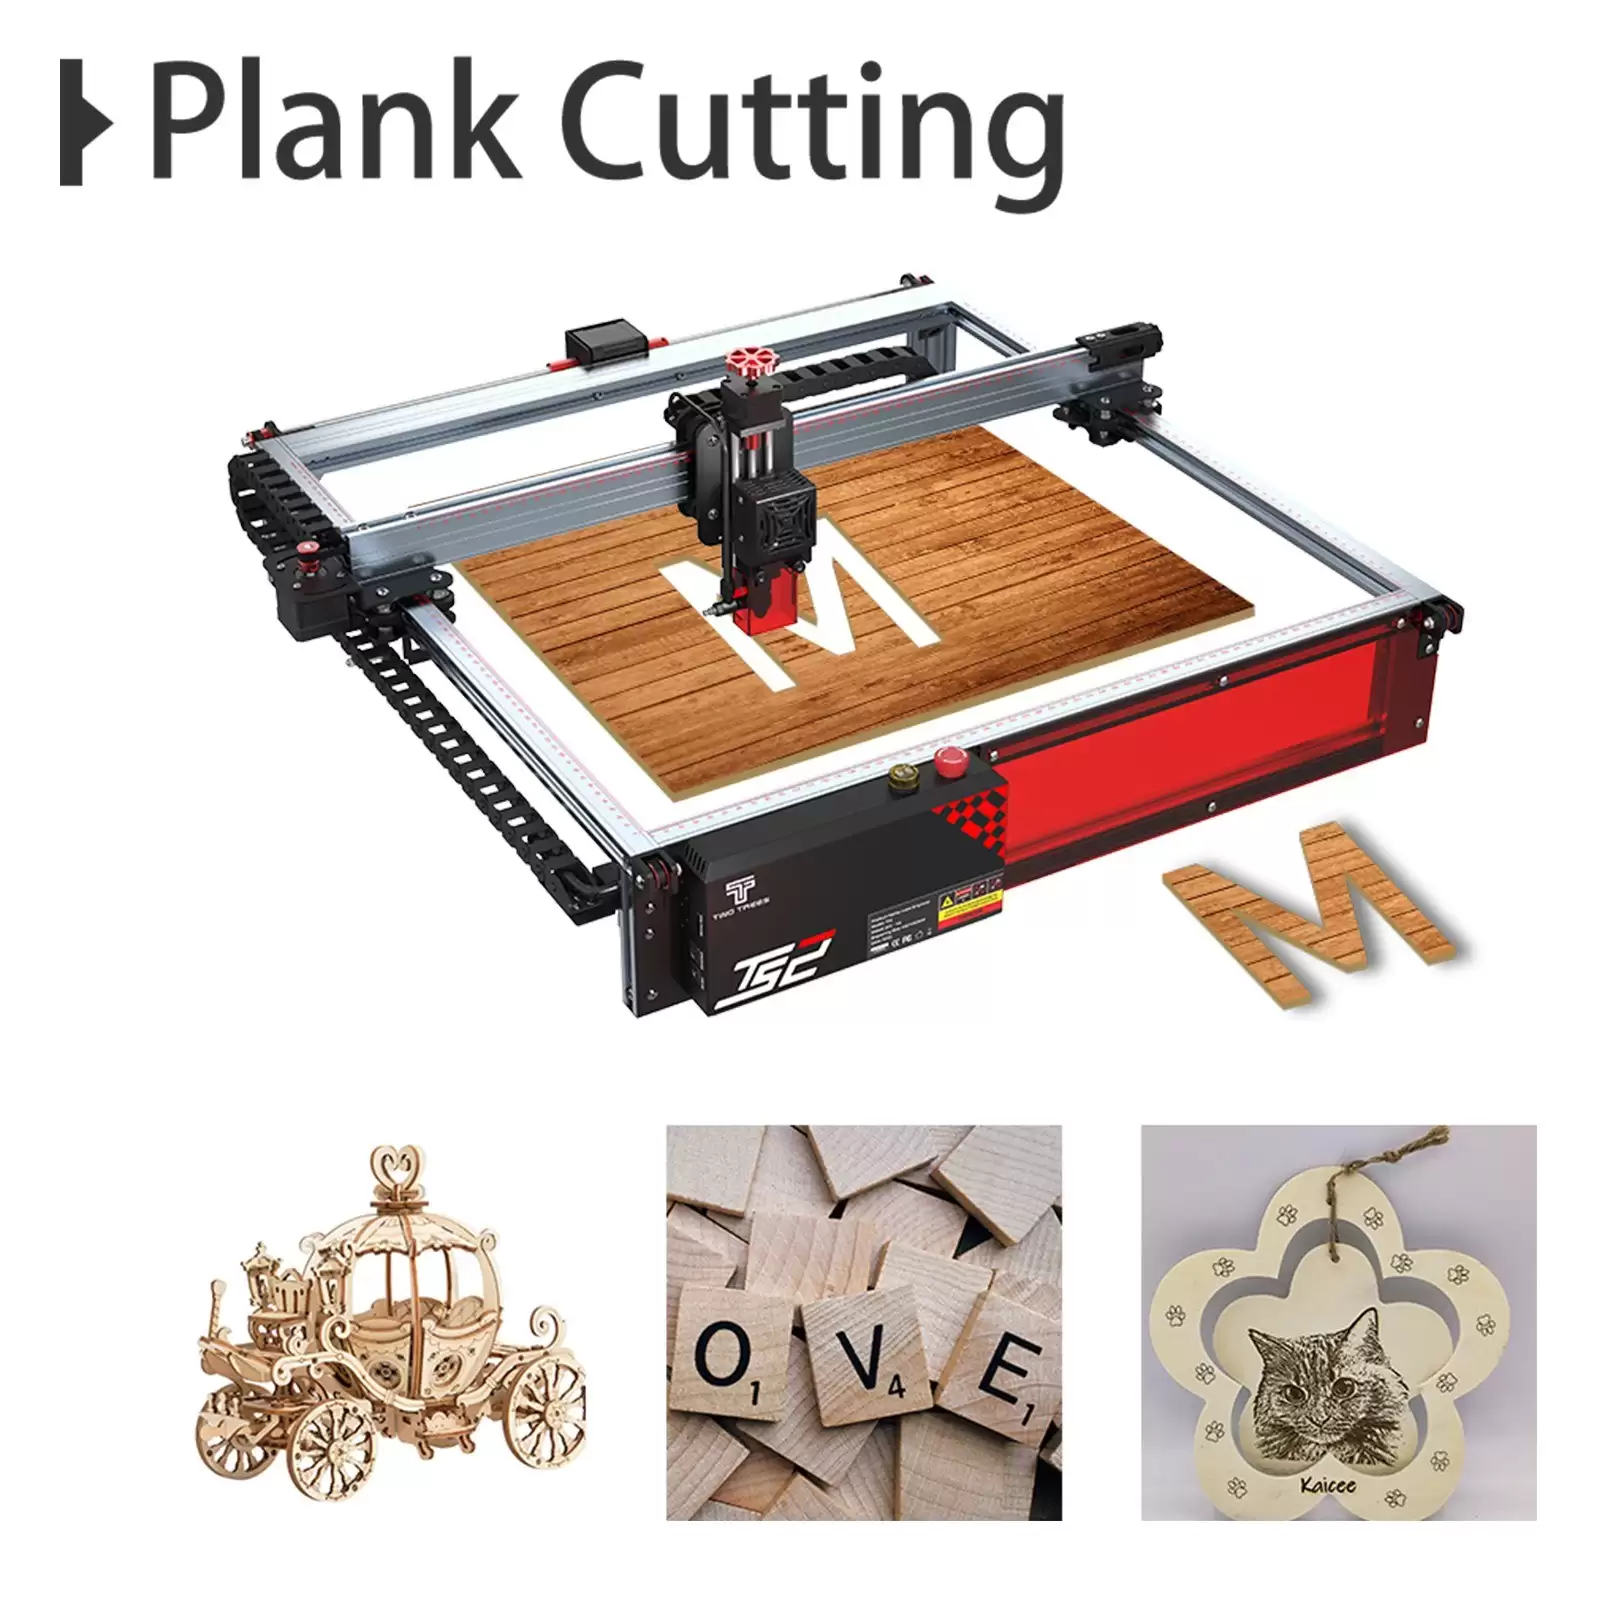 Order In Just €269 Two Trees Ts2 10w Laser Engraver Cutter With Air Assit System With This Discount Coupon At Cafago